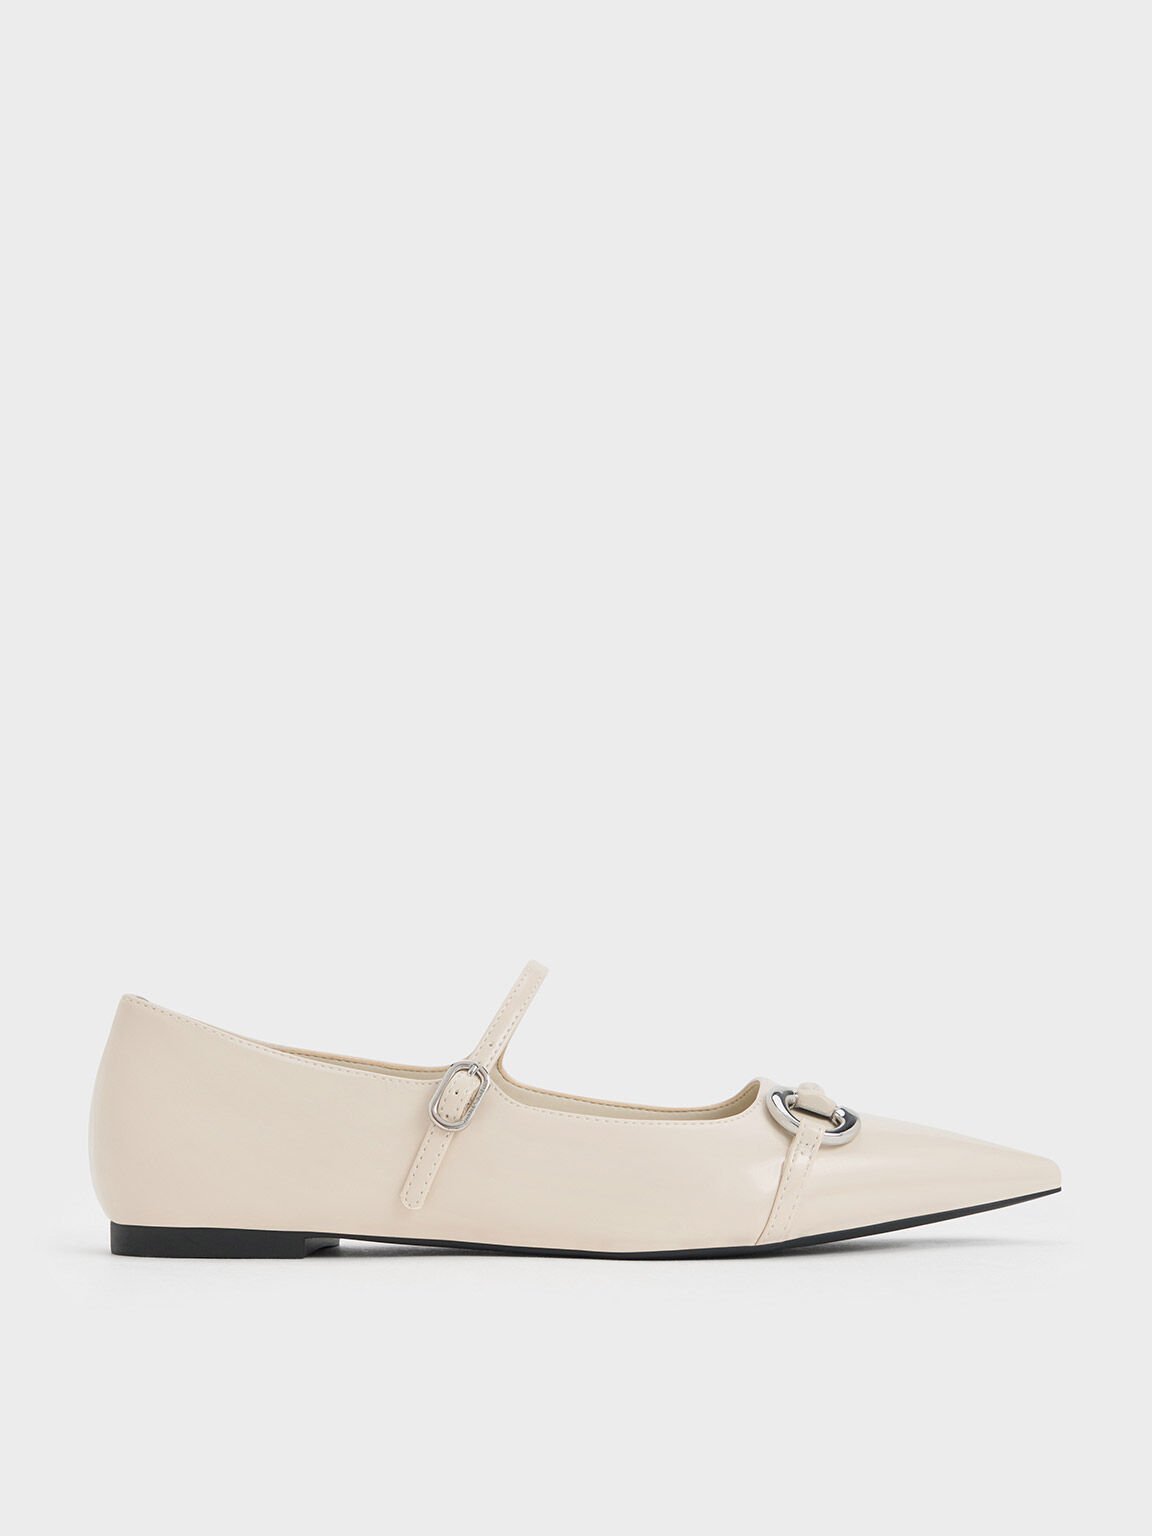 Women's Flats | Shop Exclusives Styles | CHARLES & KEITH International